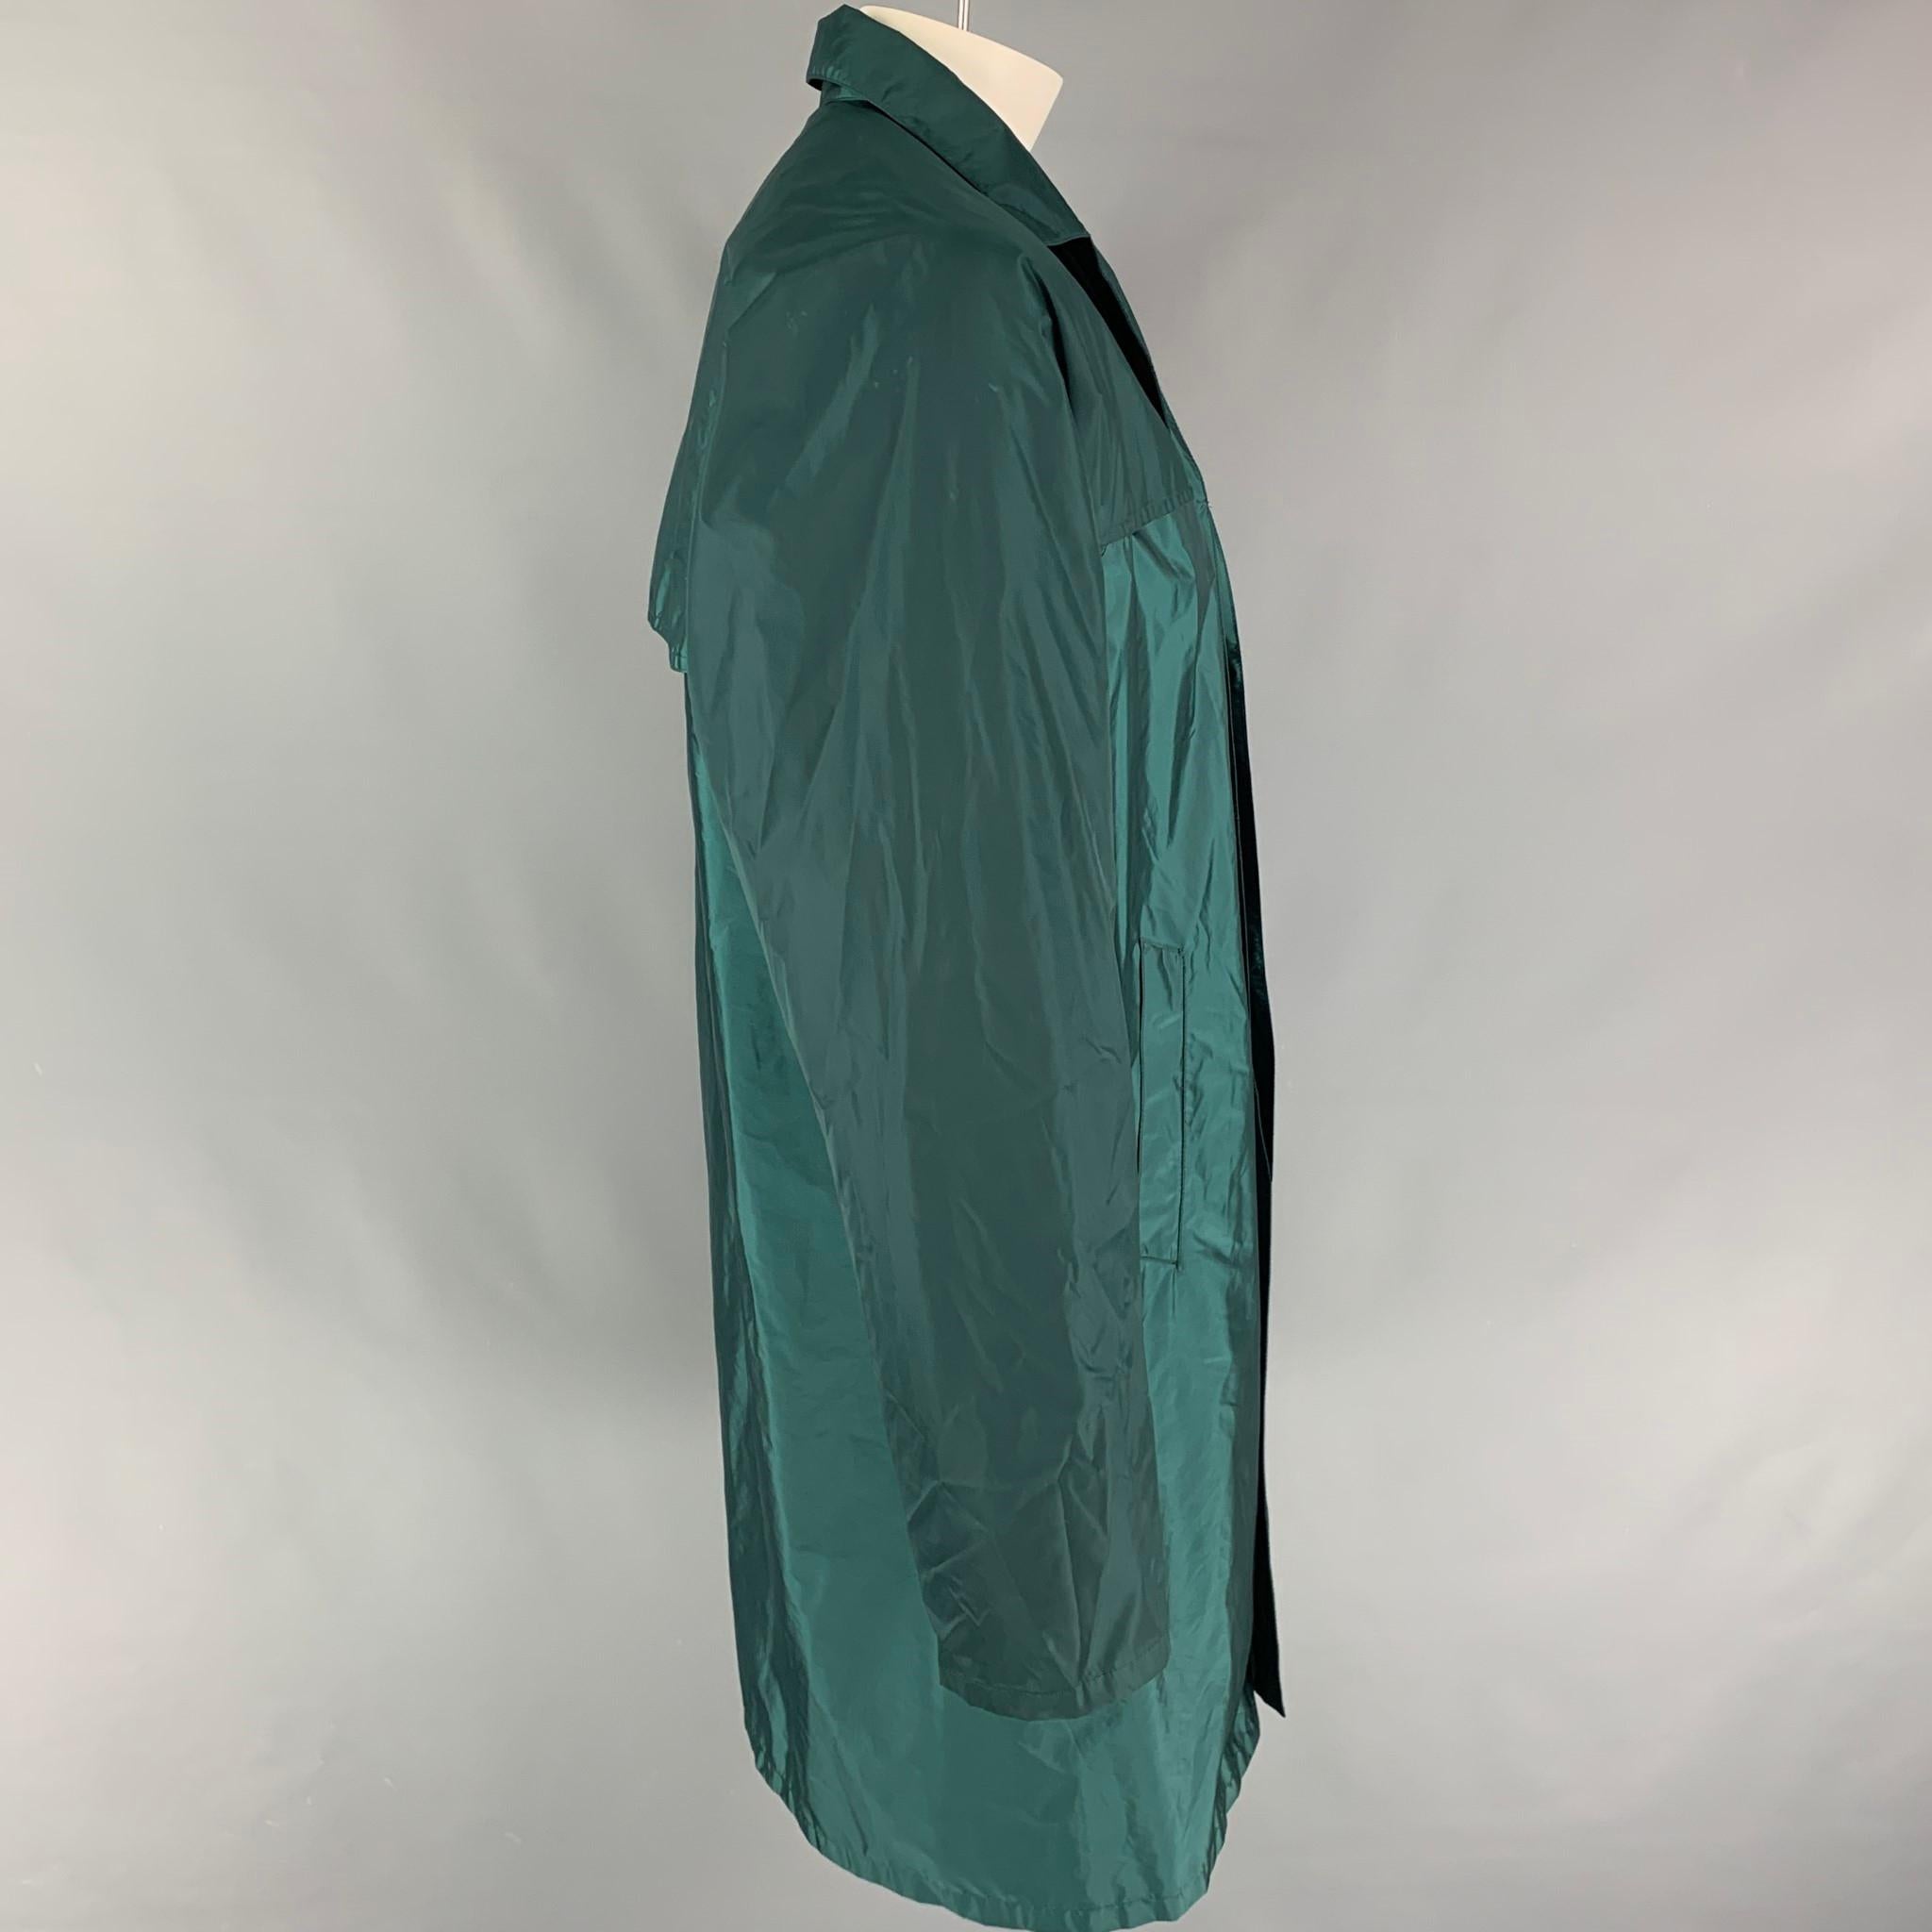 PRADA trench coat comes in a green nylon blend featuring a spread collar, slit pockets, and a hidden placket closure. Made in Italy. 

Very Good Pre-Owned Condition.
Marked: XL

Measurements:

Shoulder: 17 in.
Chest: 48 in.
Sleeve: 27 in.
Length: